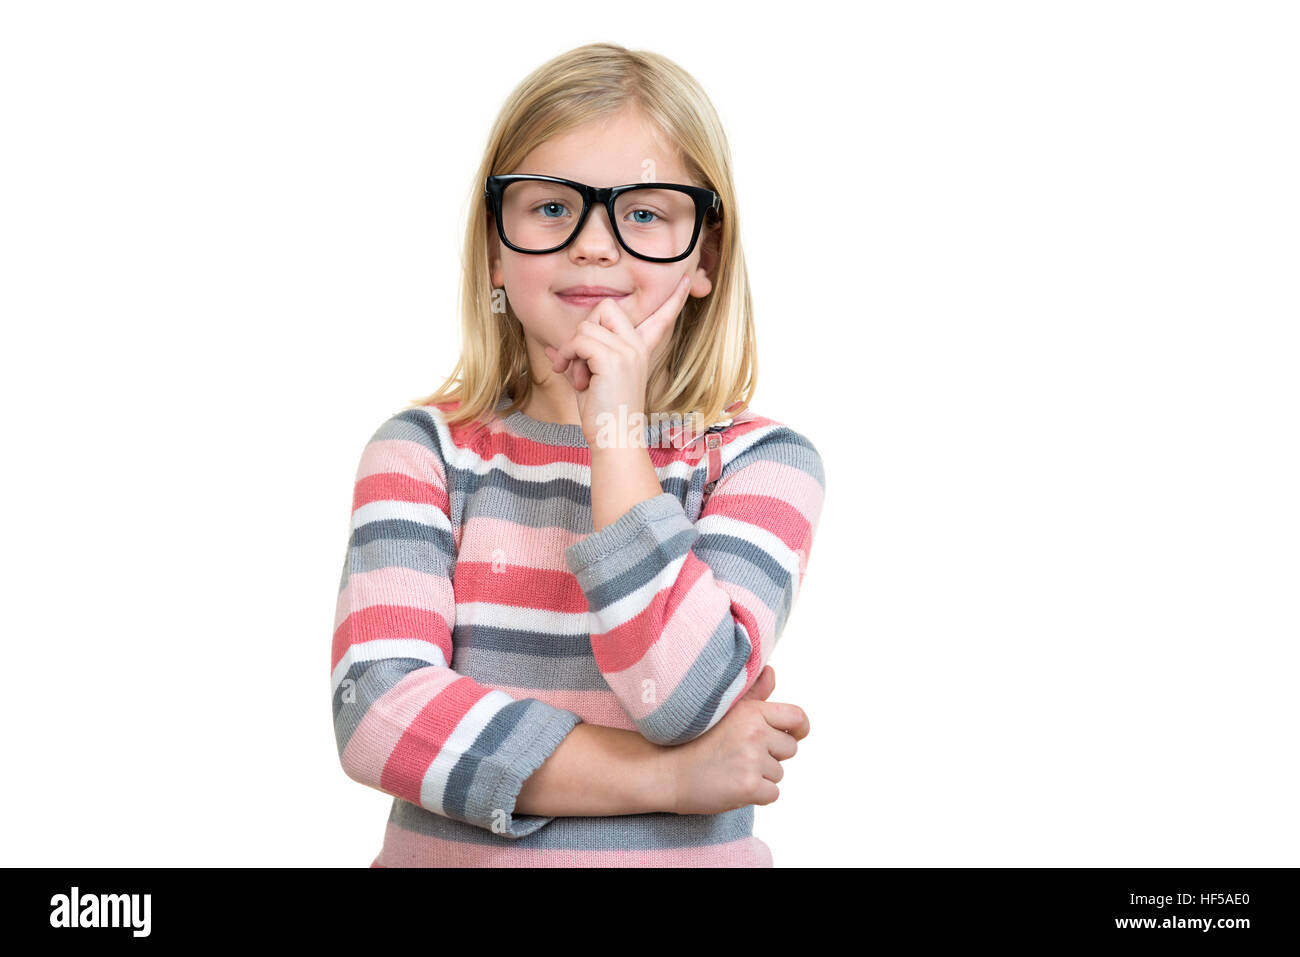 Adorable child in glasses thinking isolated on white Stock Photo